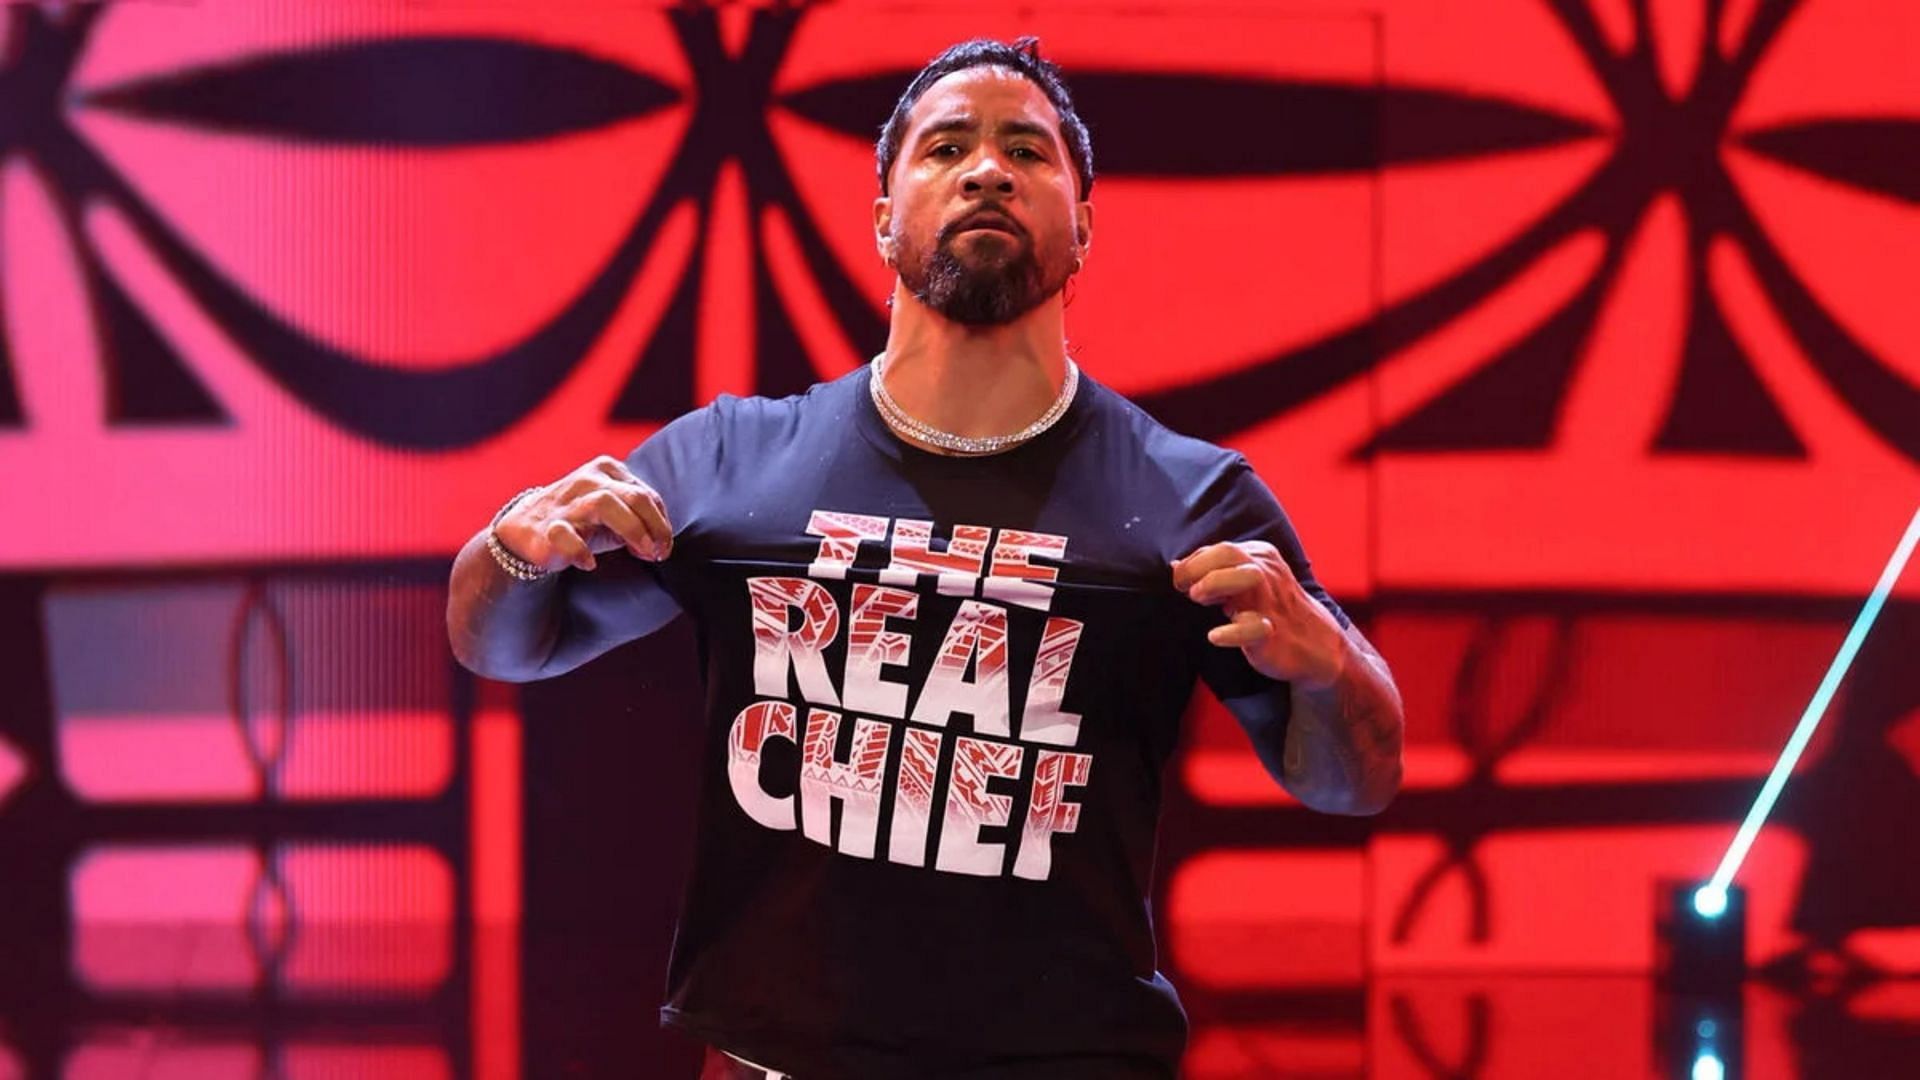 Jey Uso is currently active on WWE RAW